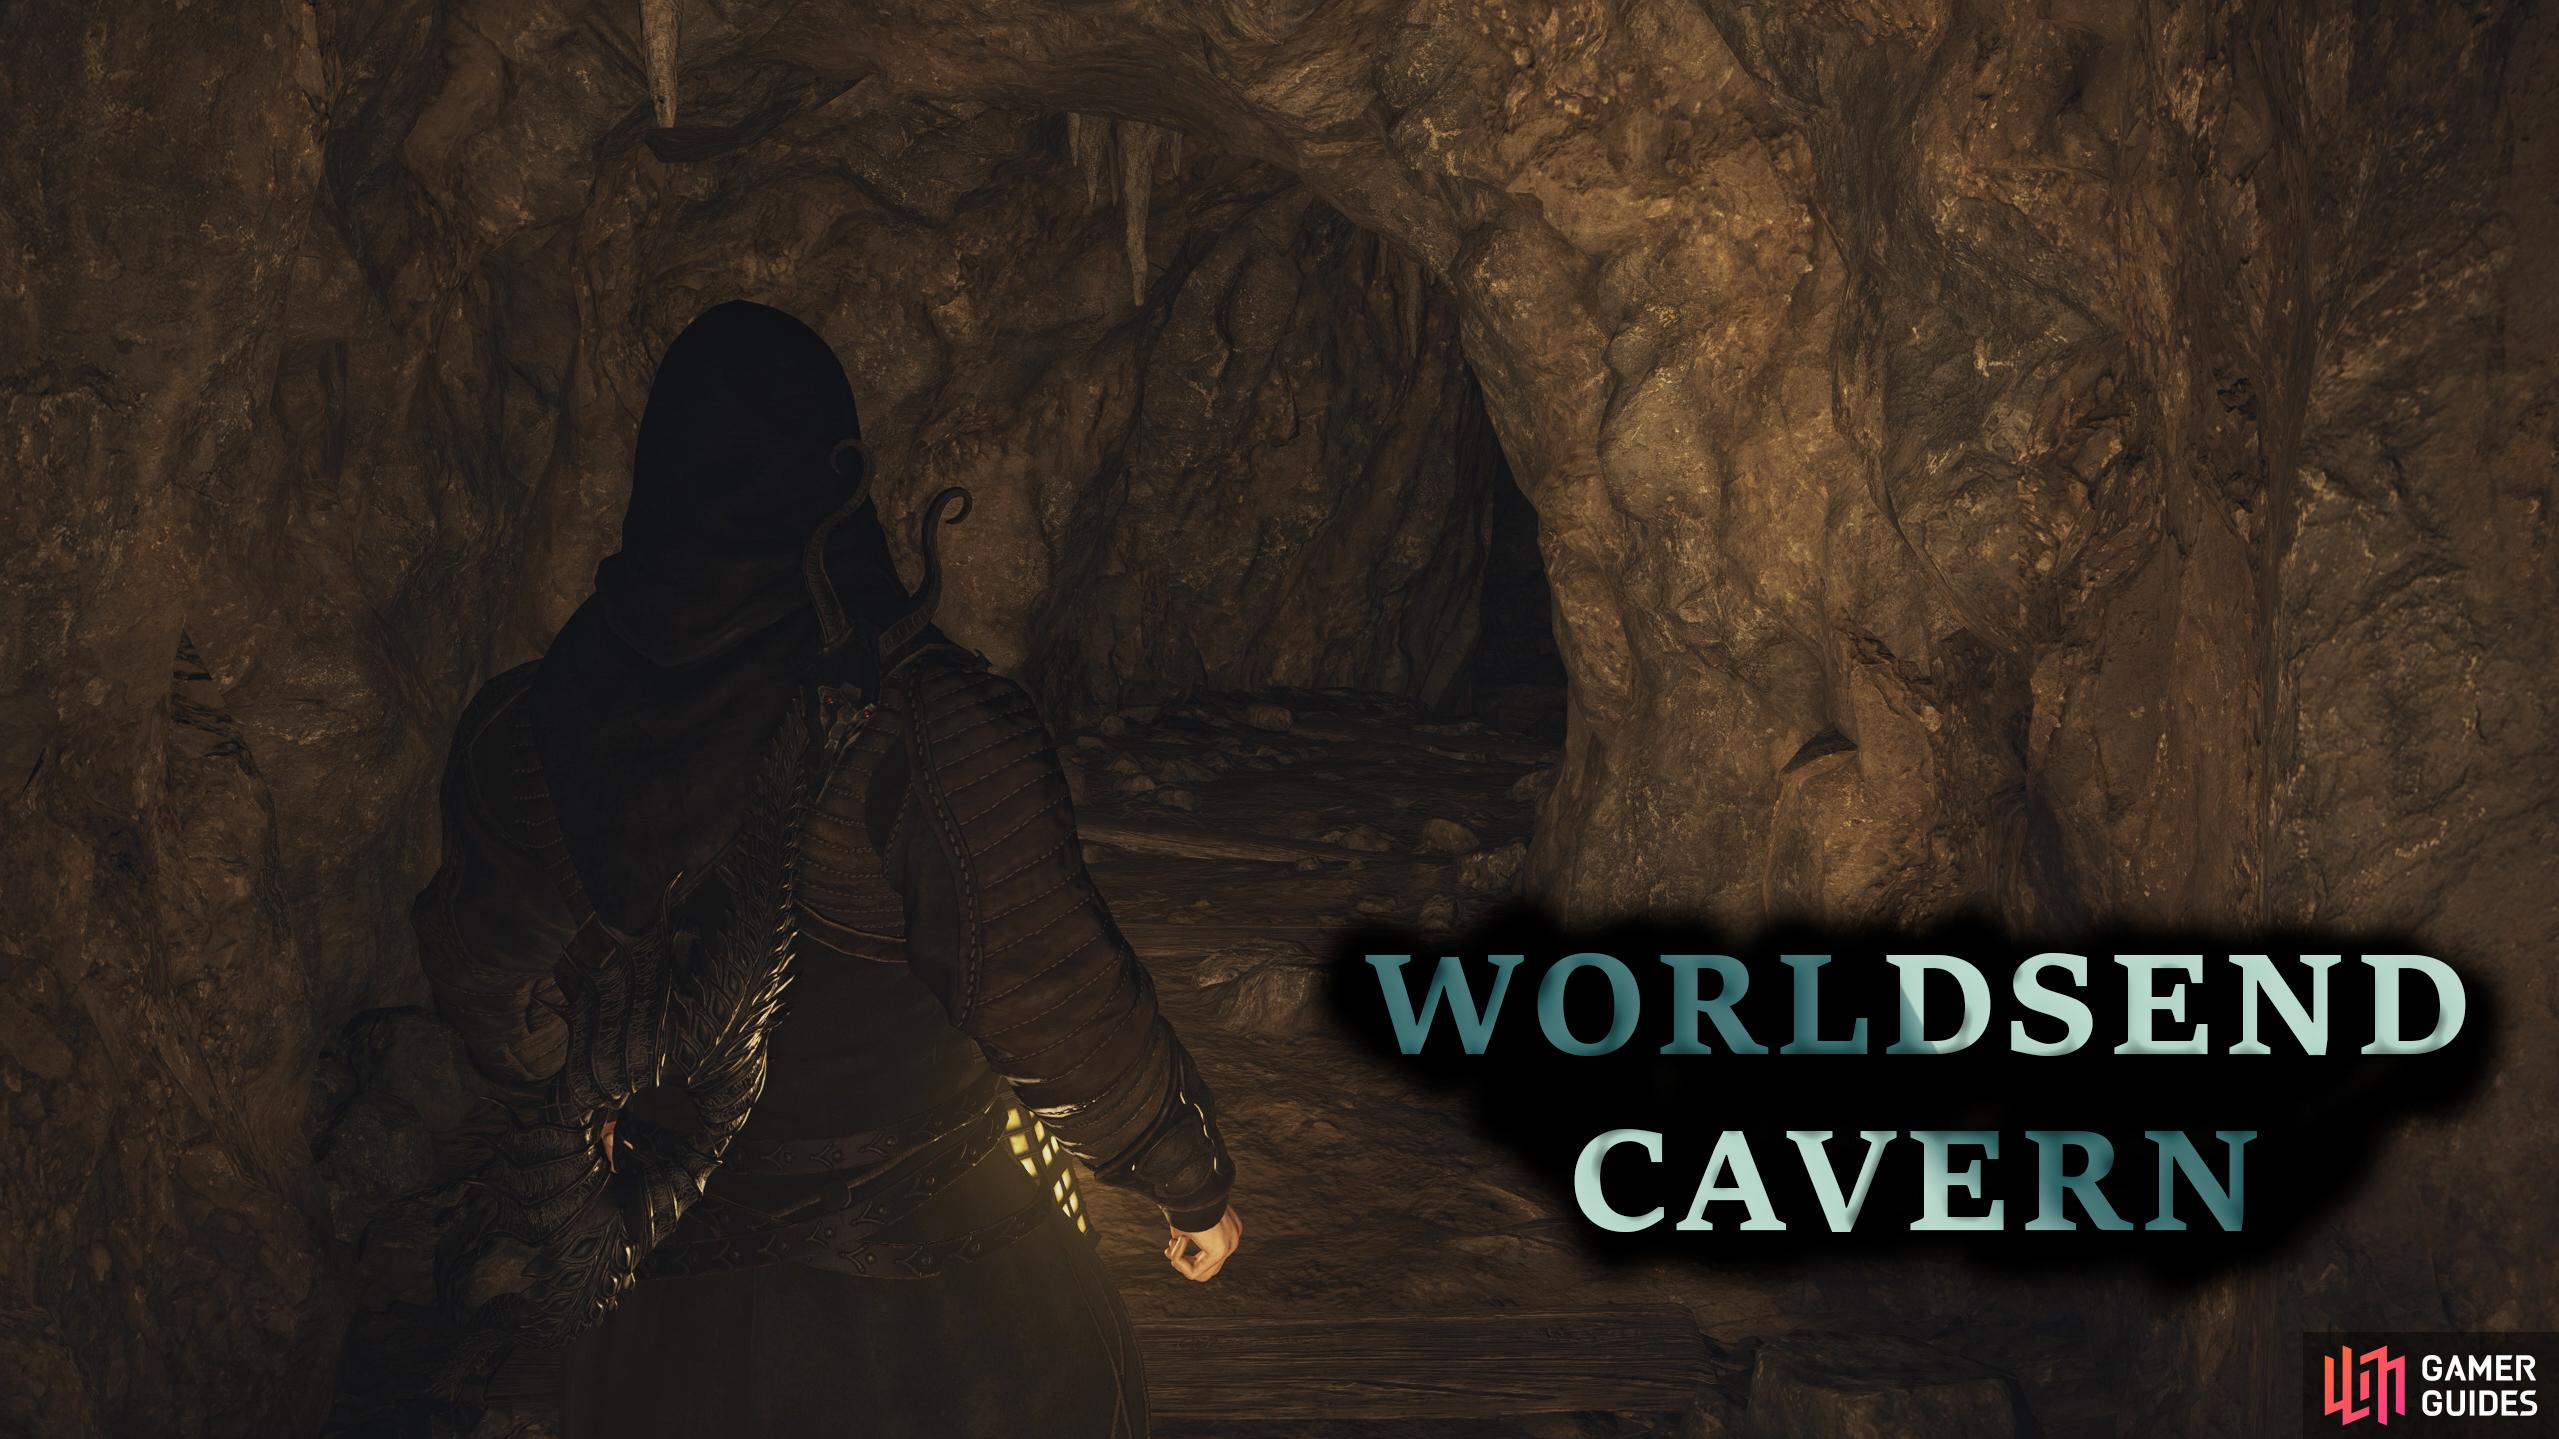 The Worldsend Cavern is a hidden cave system in Dragon’s Dogma 2.